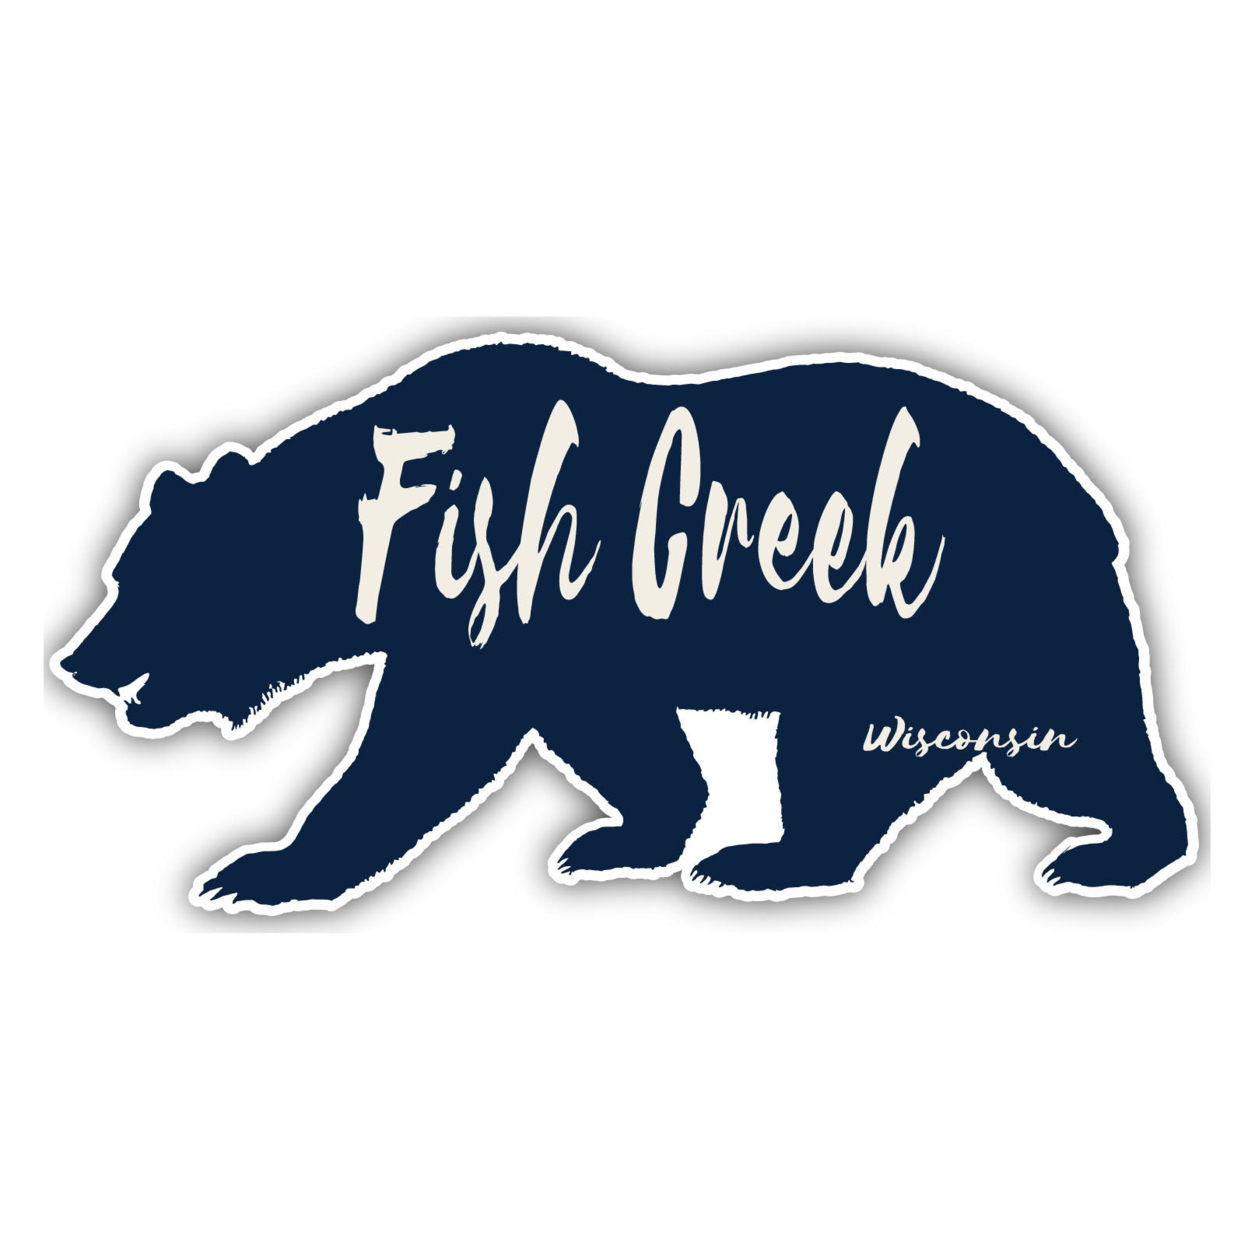 Fish Creek Wisconsin Souvenir Decorative Stickers (Choose Theme And Size) - 4-Pack, 12-Inch, Bear